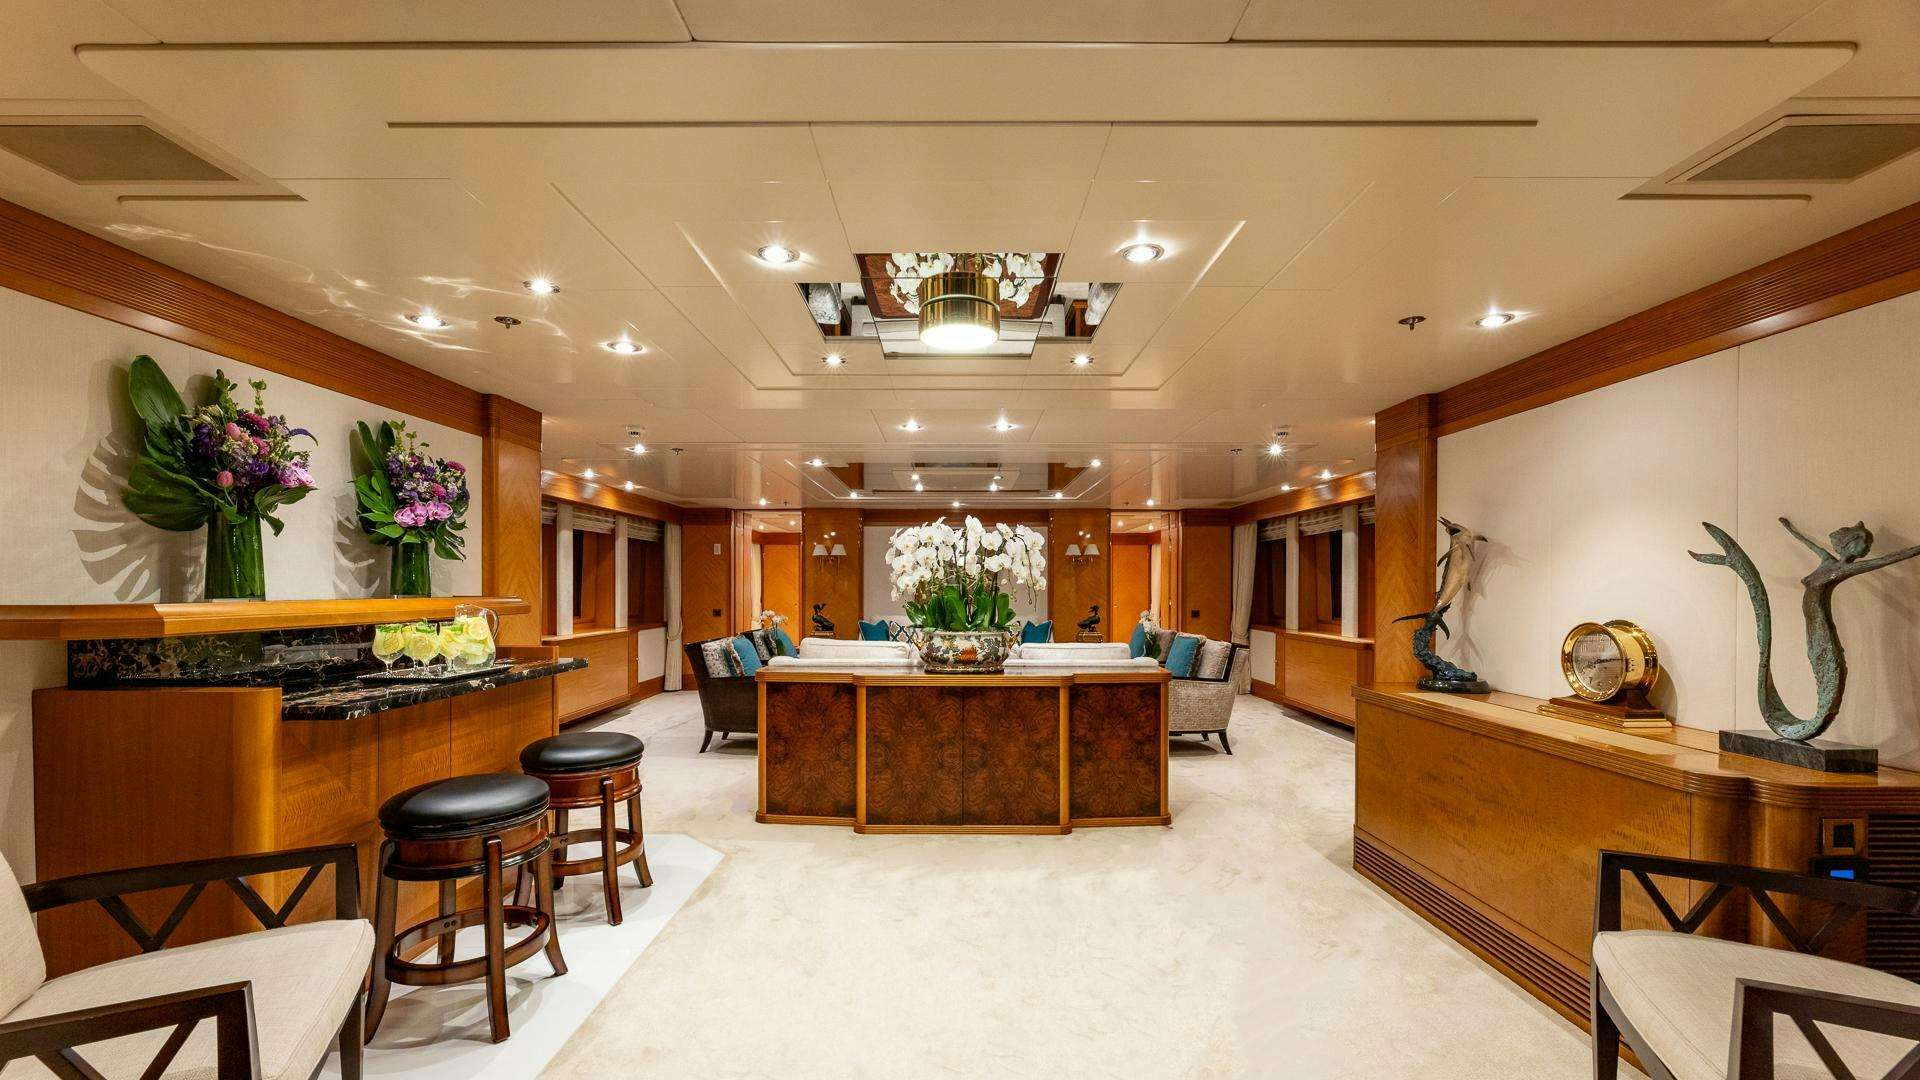 Amanti
Yacht for Sale